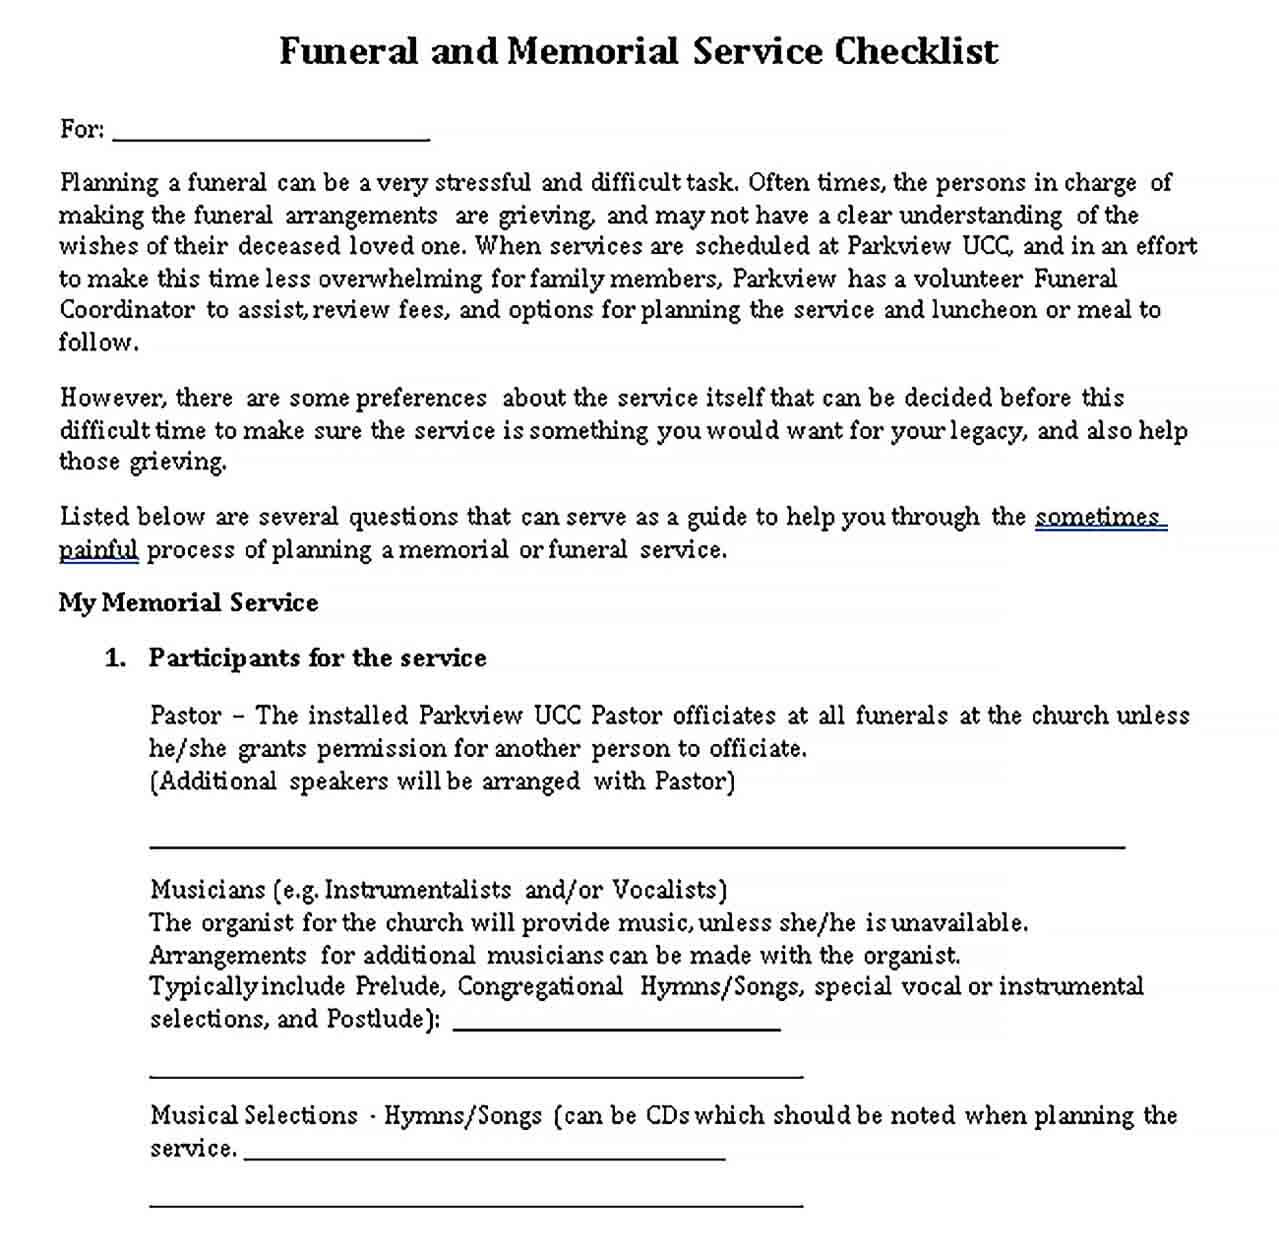 Sample Funeral and Memorial Service Checklist